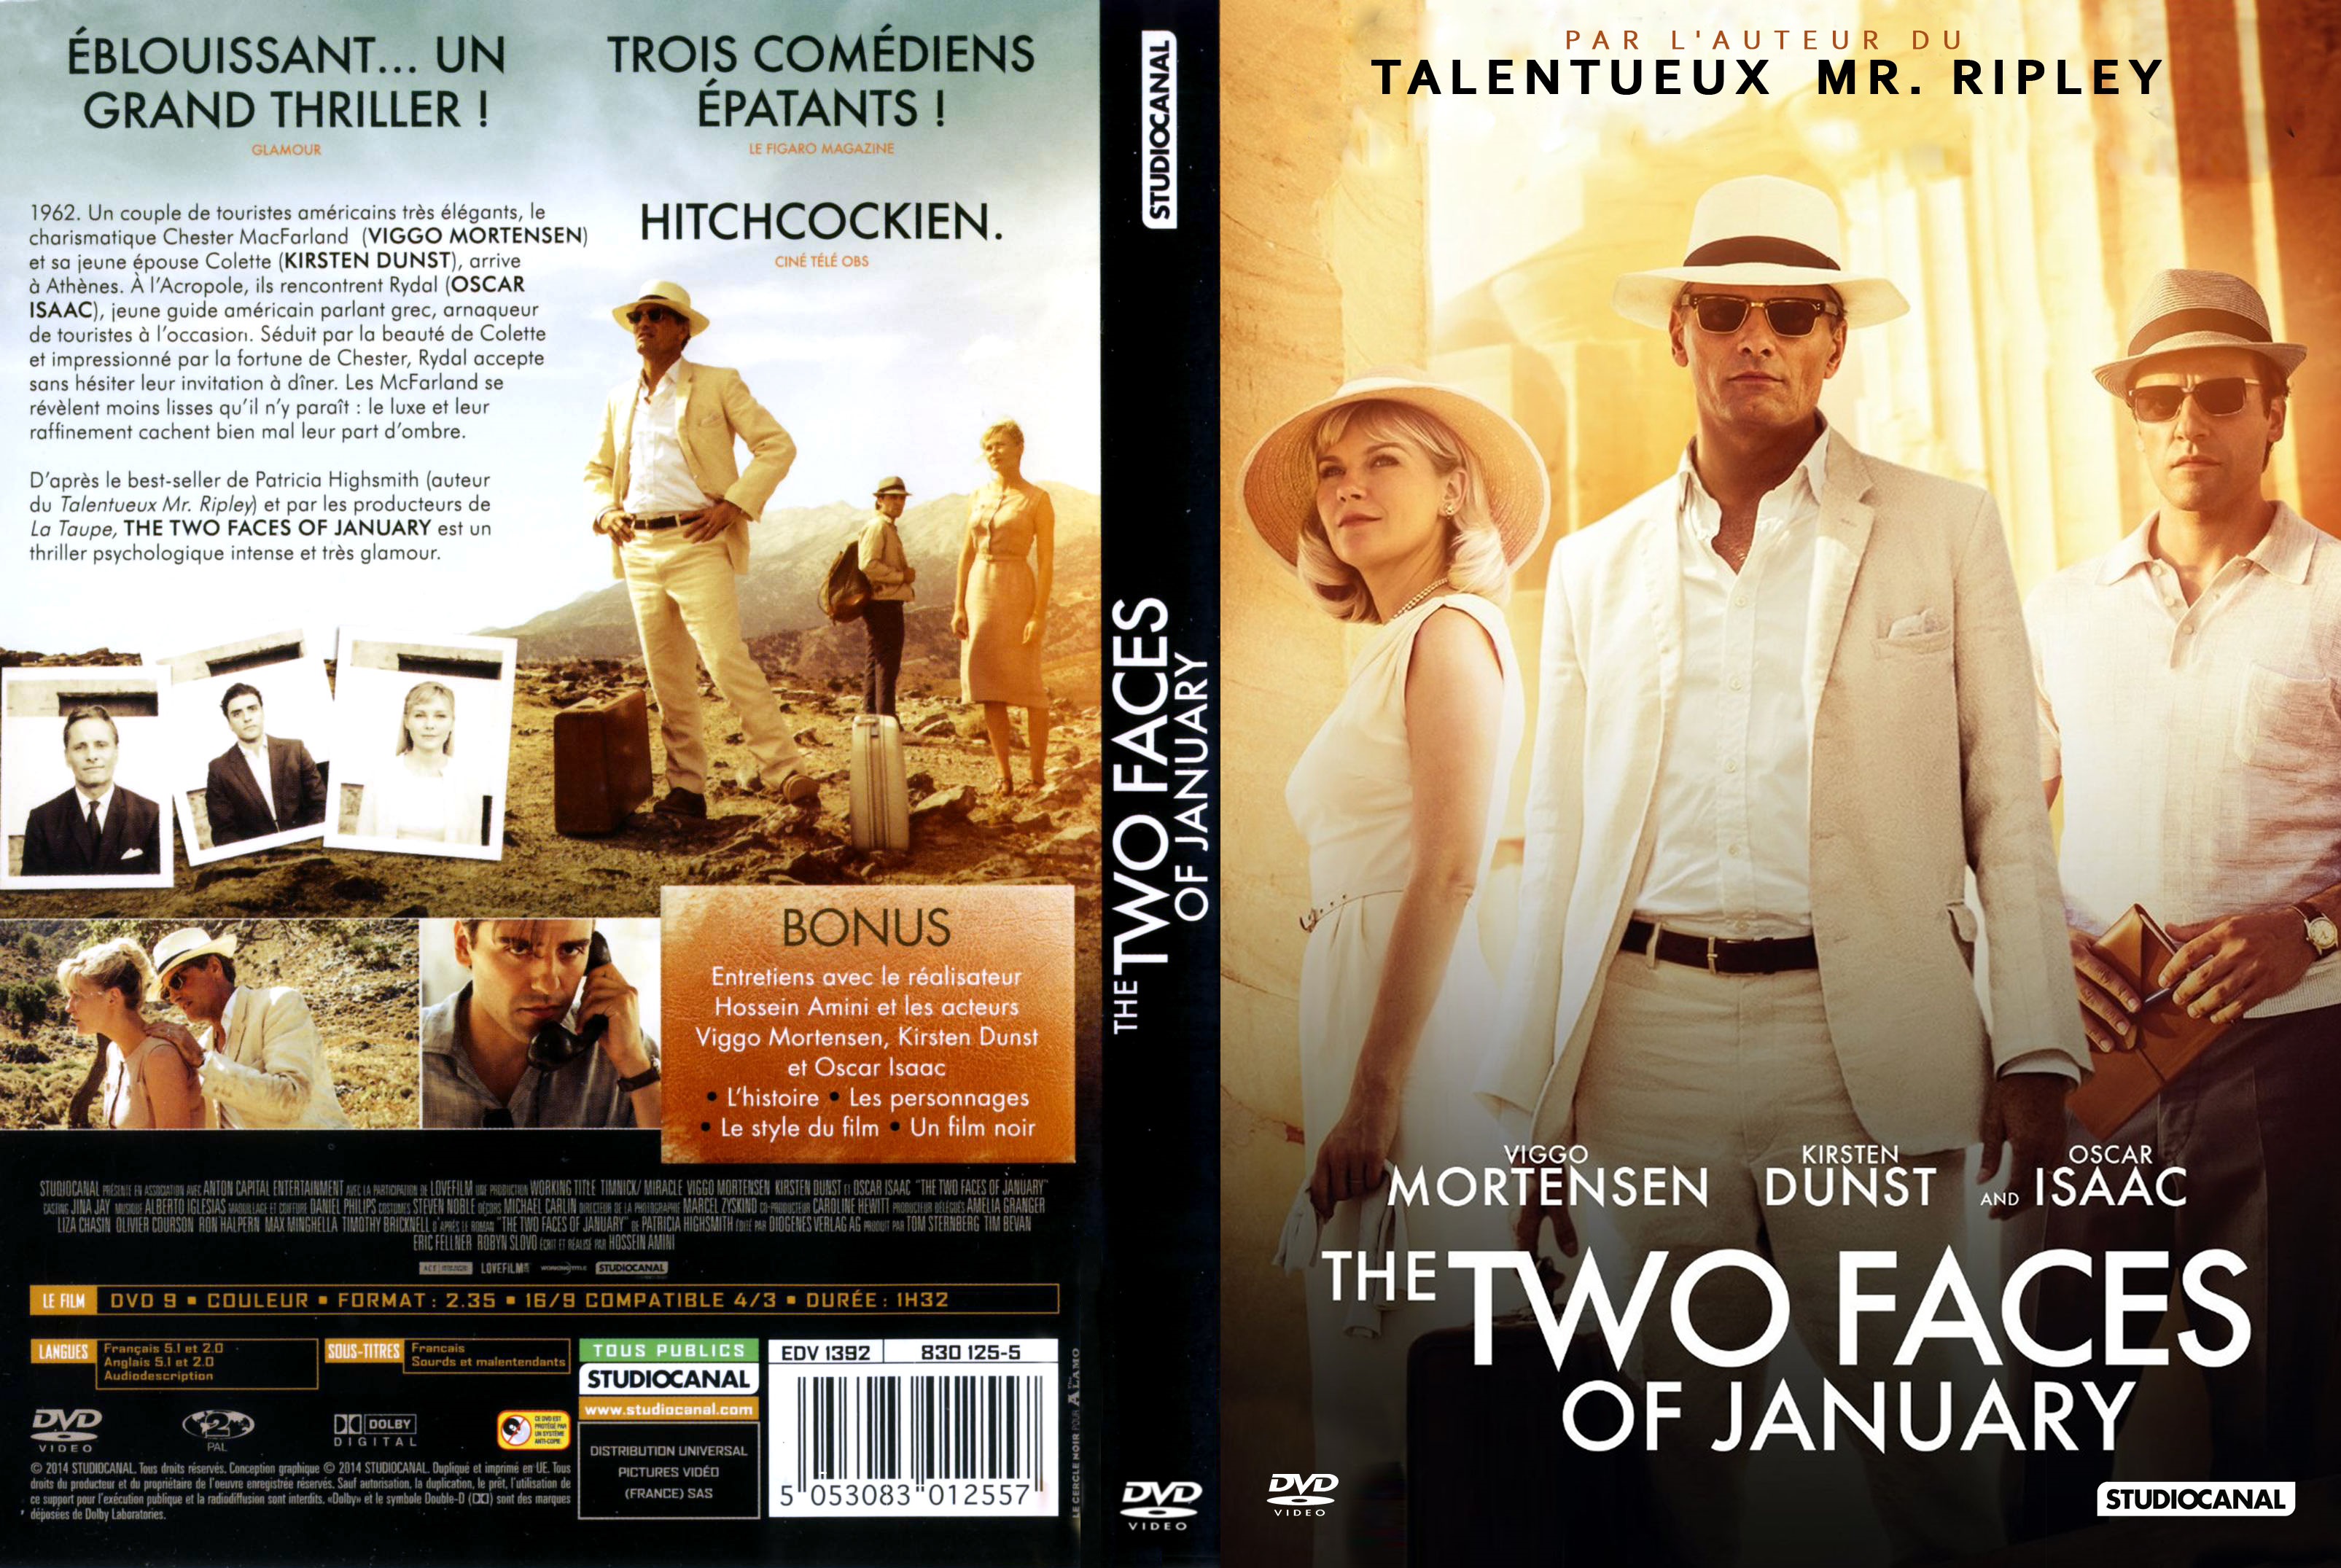 Jaquette DVD The Two Faces of January